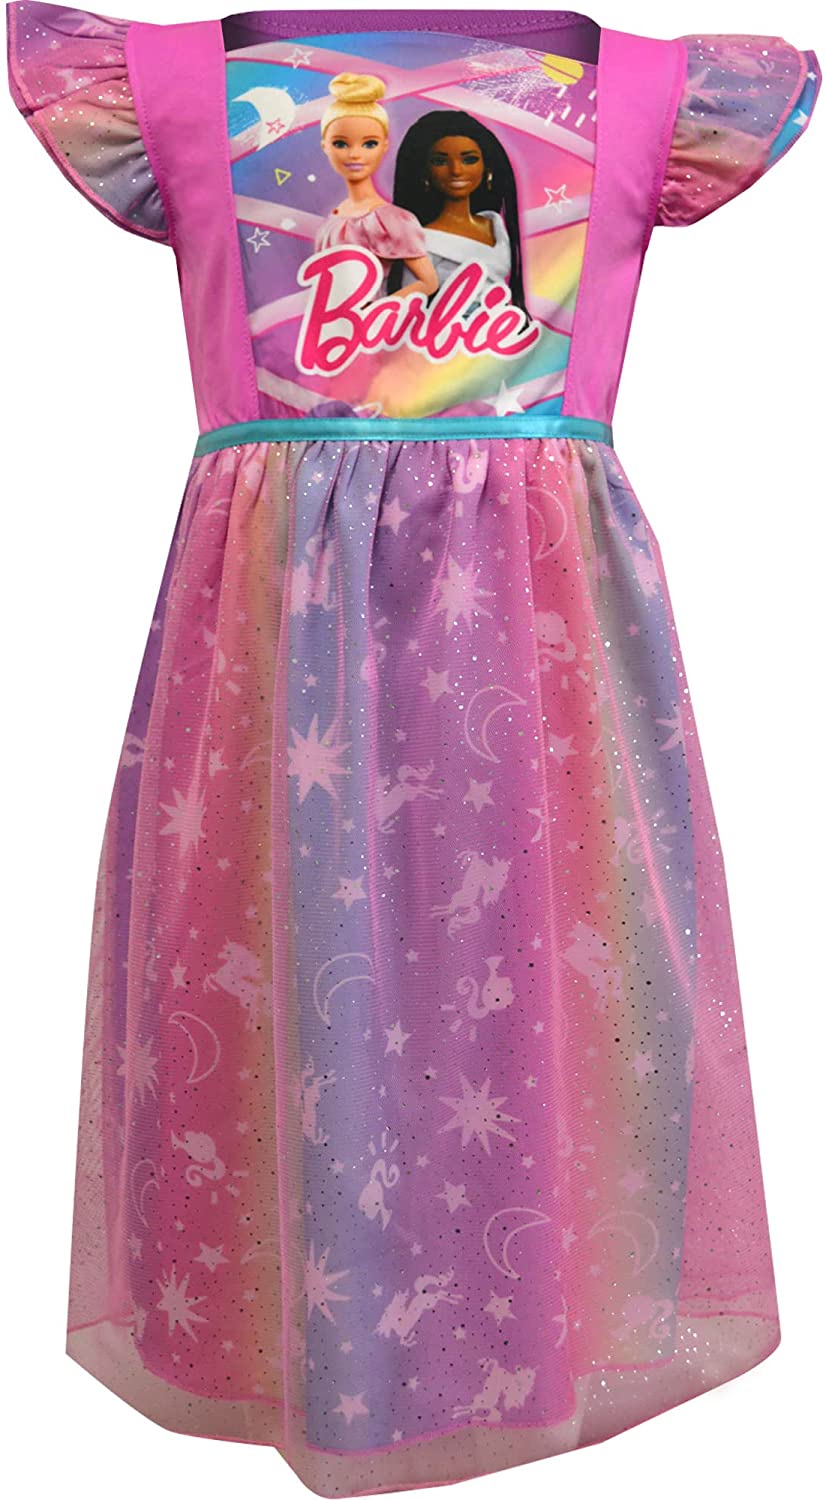 Barbie Girls' Nightgown with Rainbow Overlay